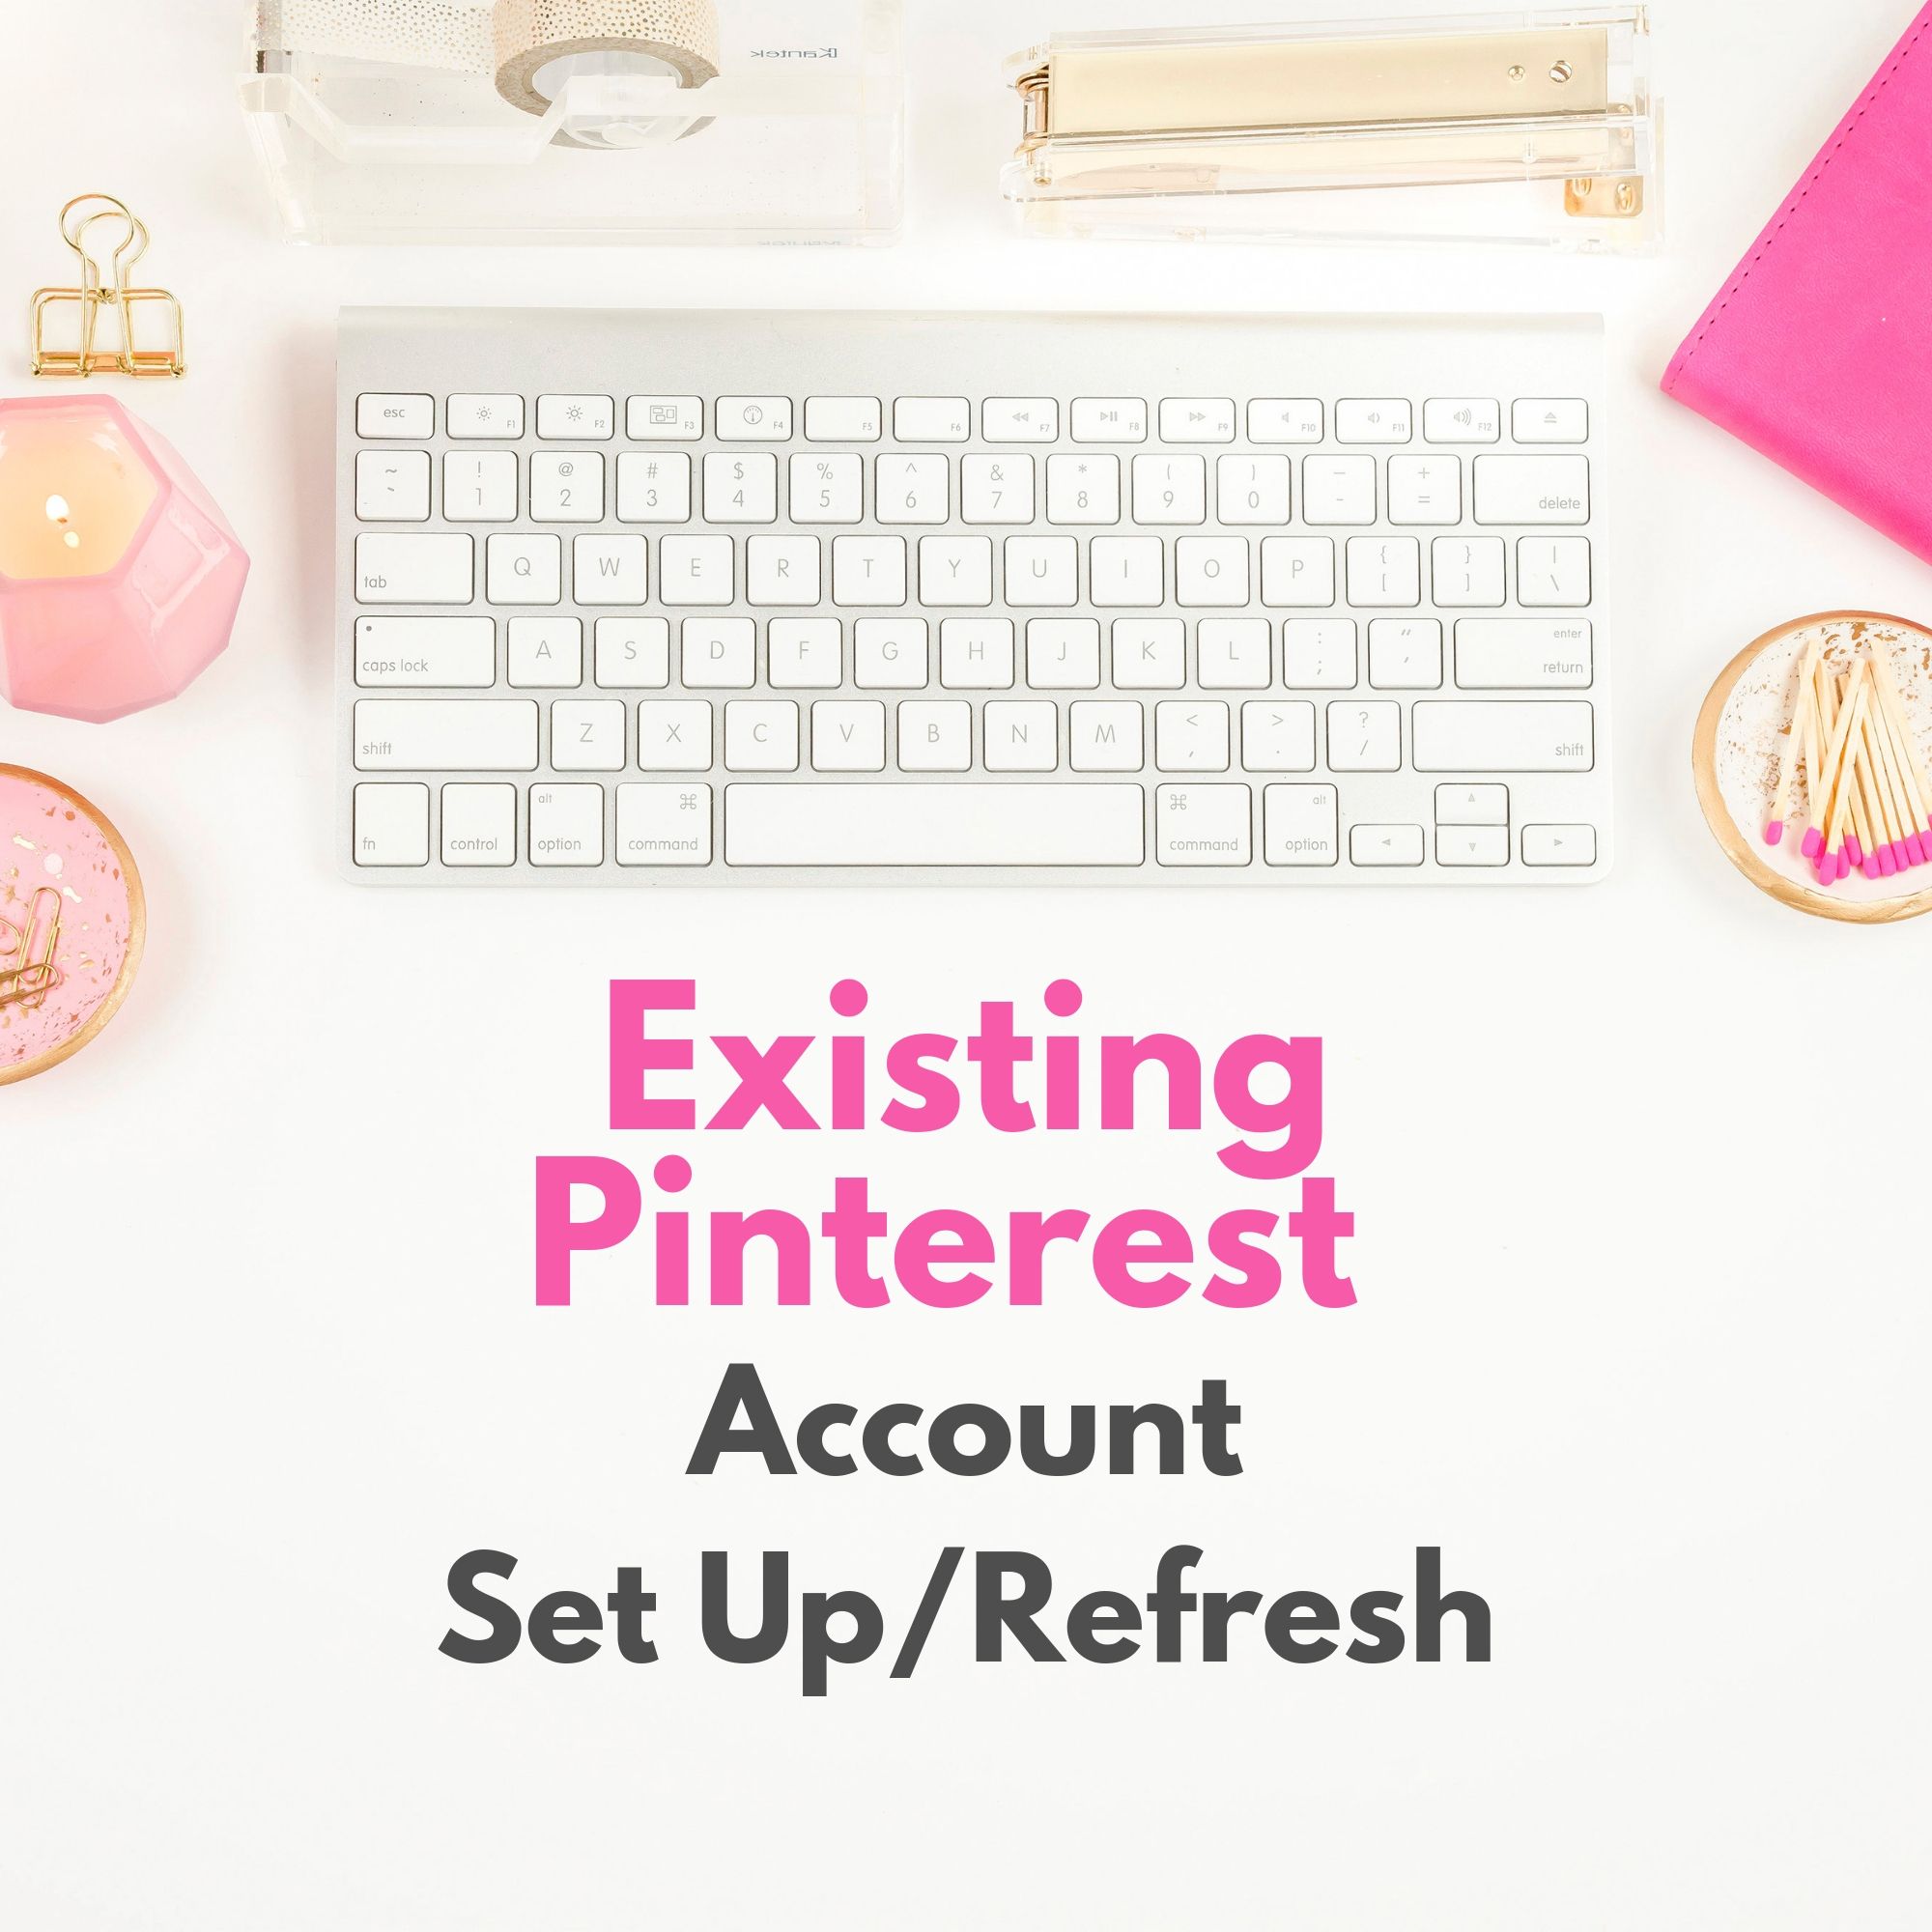 Existing Pinterest Account Set Up_Refresh